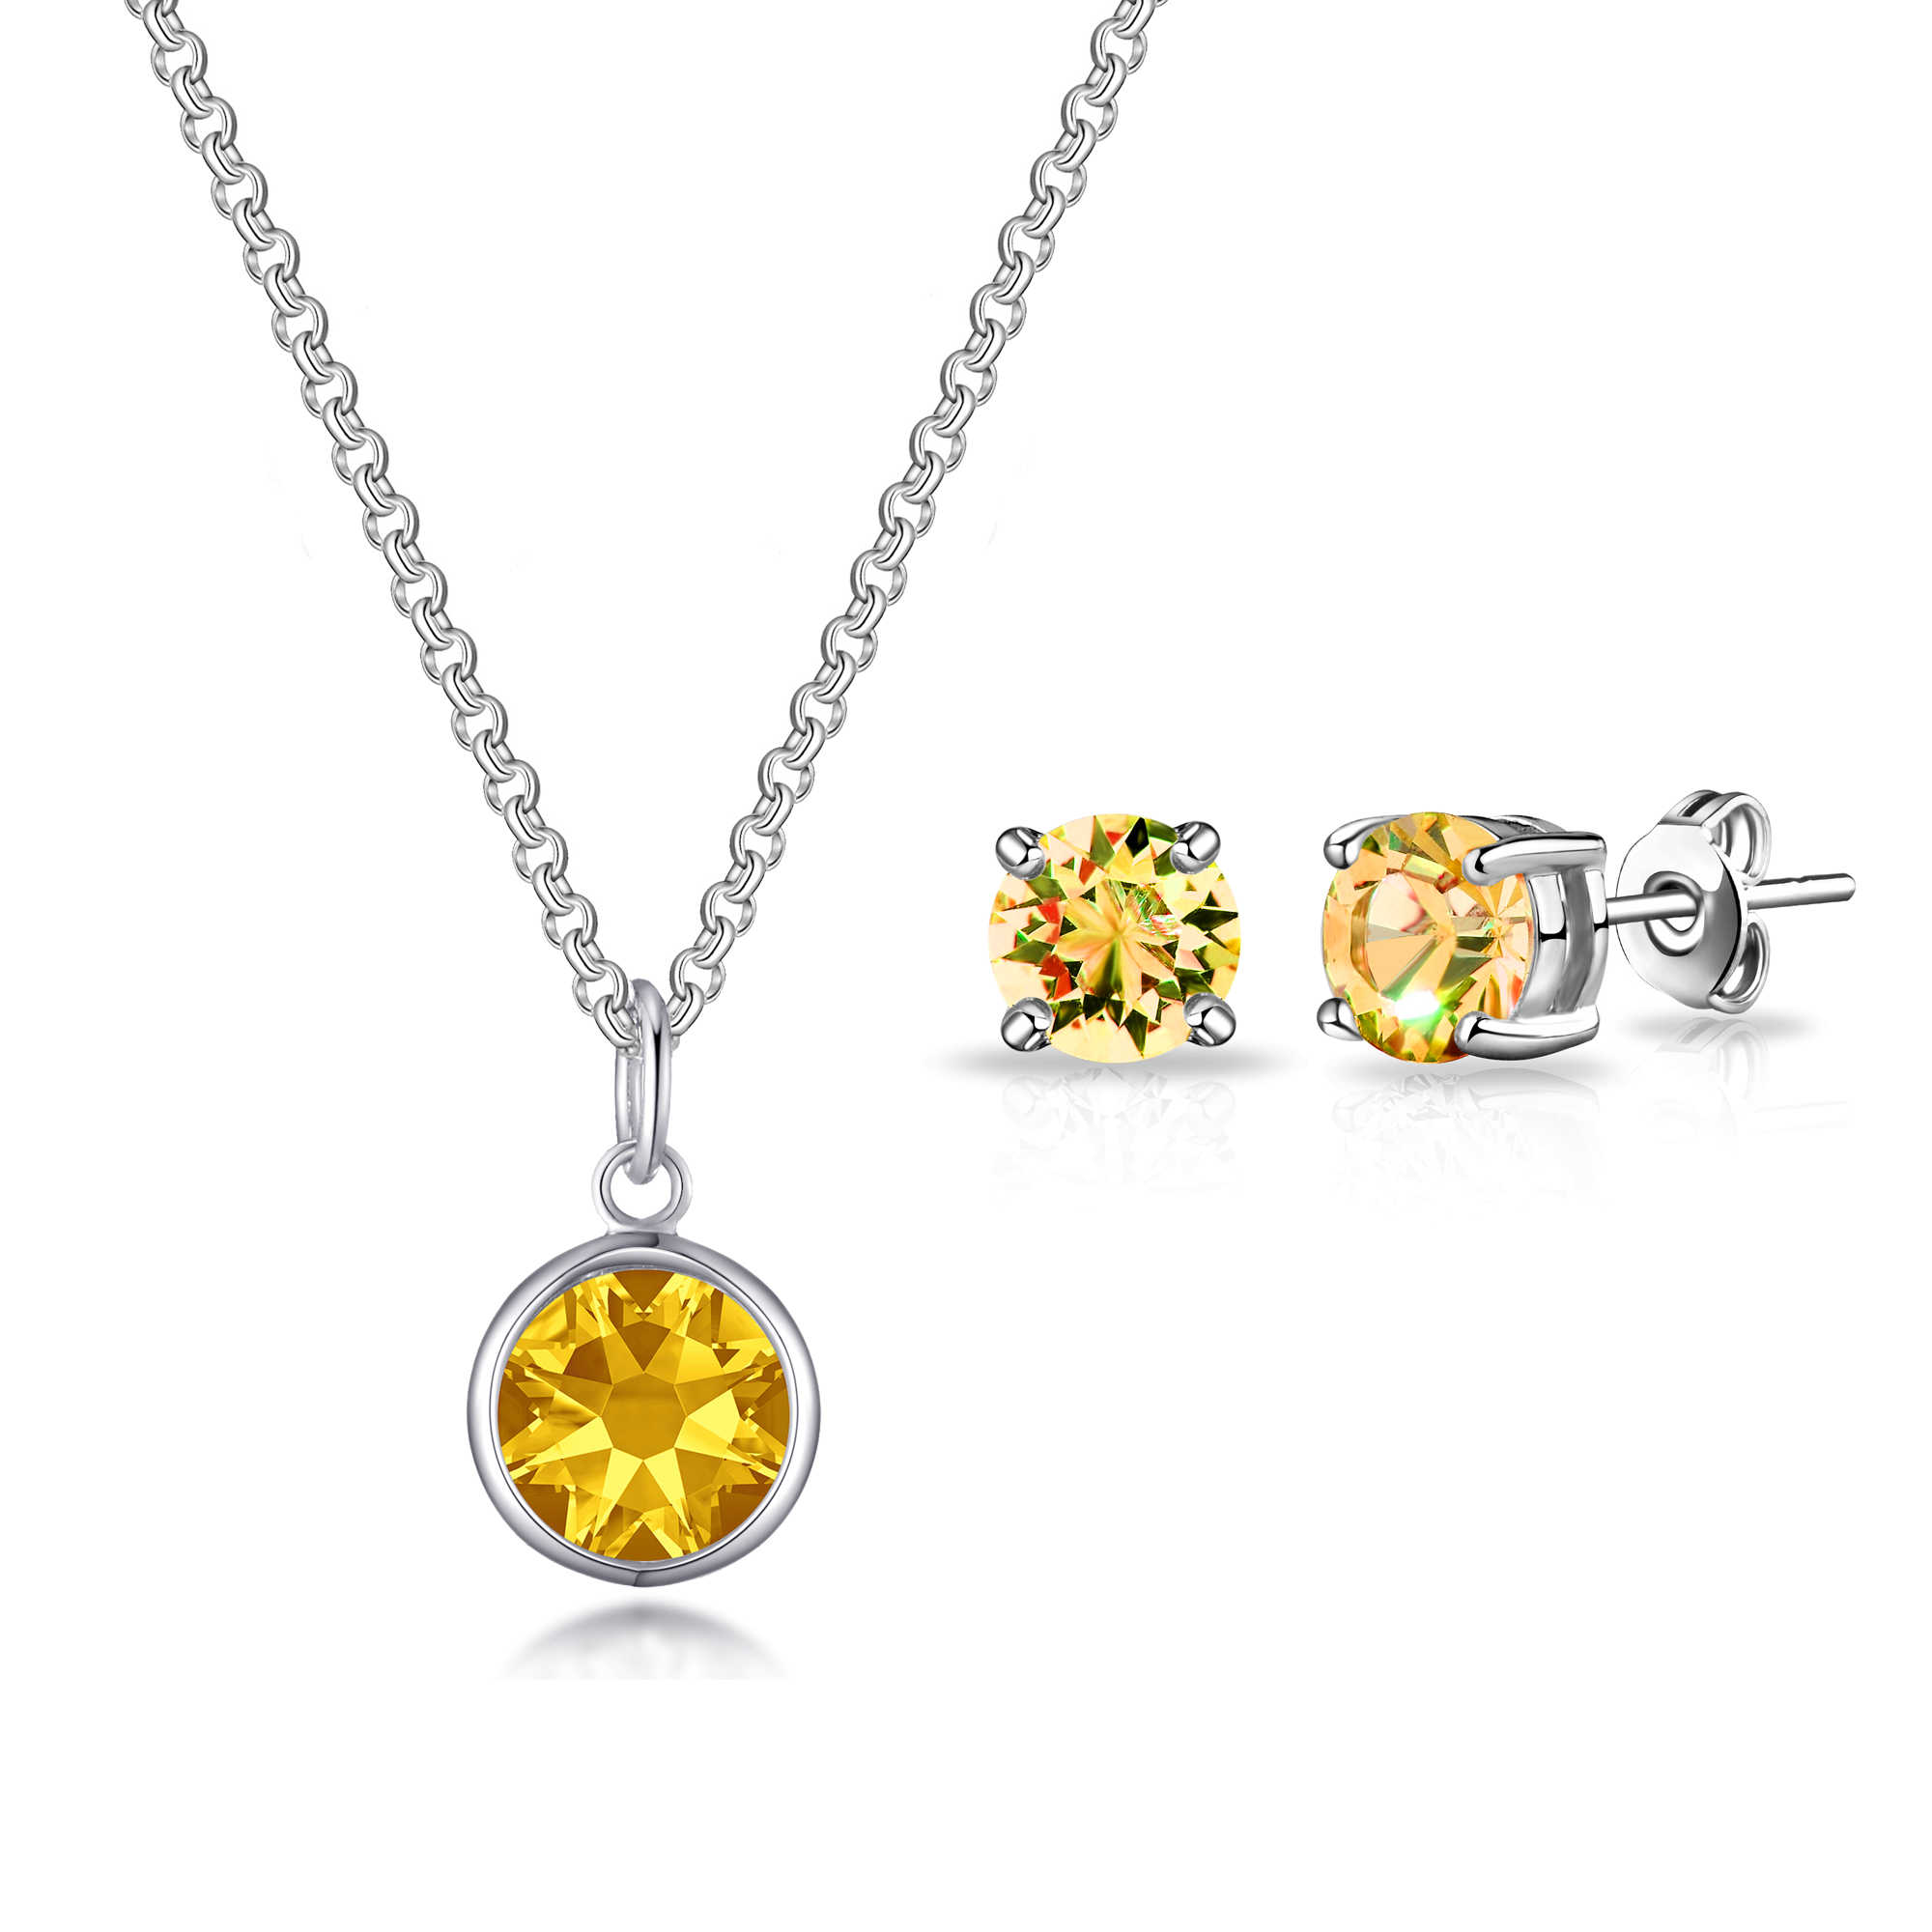 November (Topaz) Birthstone Necklace & Earrings Set Created with Zircondia® Crystals